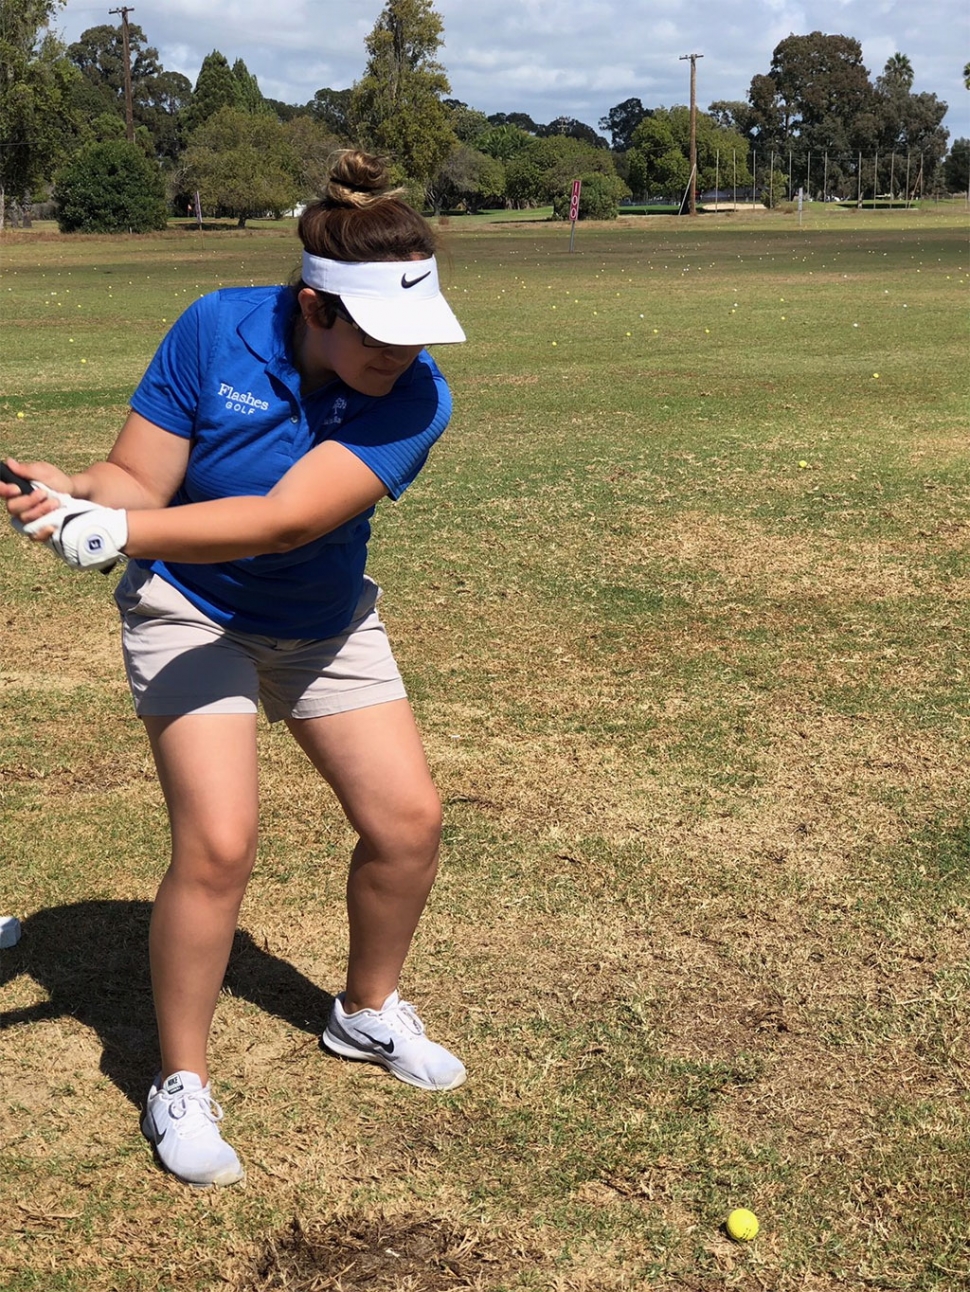 Submitted by Coach Dave MacDonald. Fillmore girl’s golf visited the Seebee Golf Course for the 3rd installment of the Citrus View League girl’s golf match. Fillmore was led by Senior Sami Ibarra who carded a 47, April Lizarraga scored a 49 and Alyssa Ibarra brought in a 51. Fillmore came in at a total of 256 which was enough to secure the team win by a total of 16 strokes. Thursday's win puts Fillmore in 1st place with two matches remaining beginning at Mountain View on Tuesday the 9th and finishing at Soule Park on Thursday, October 11th. 